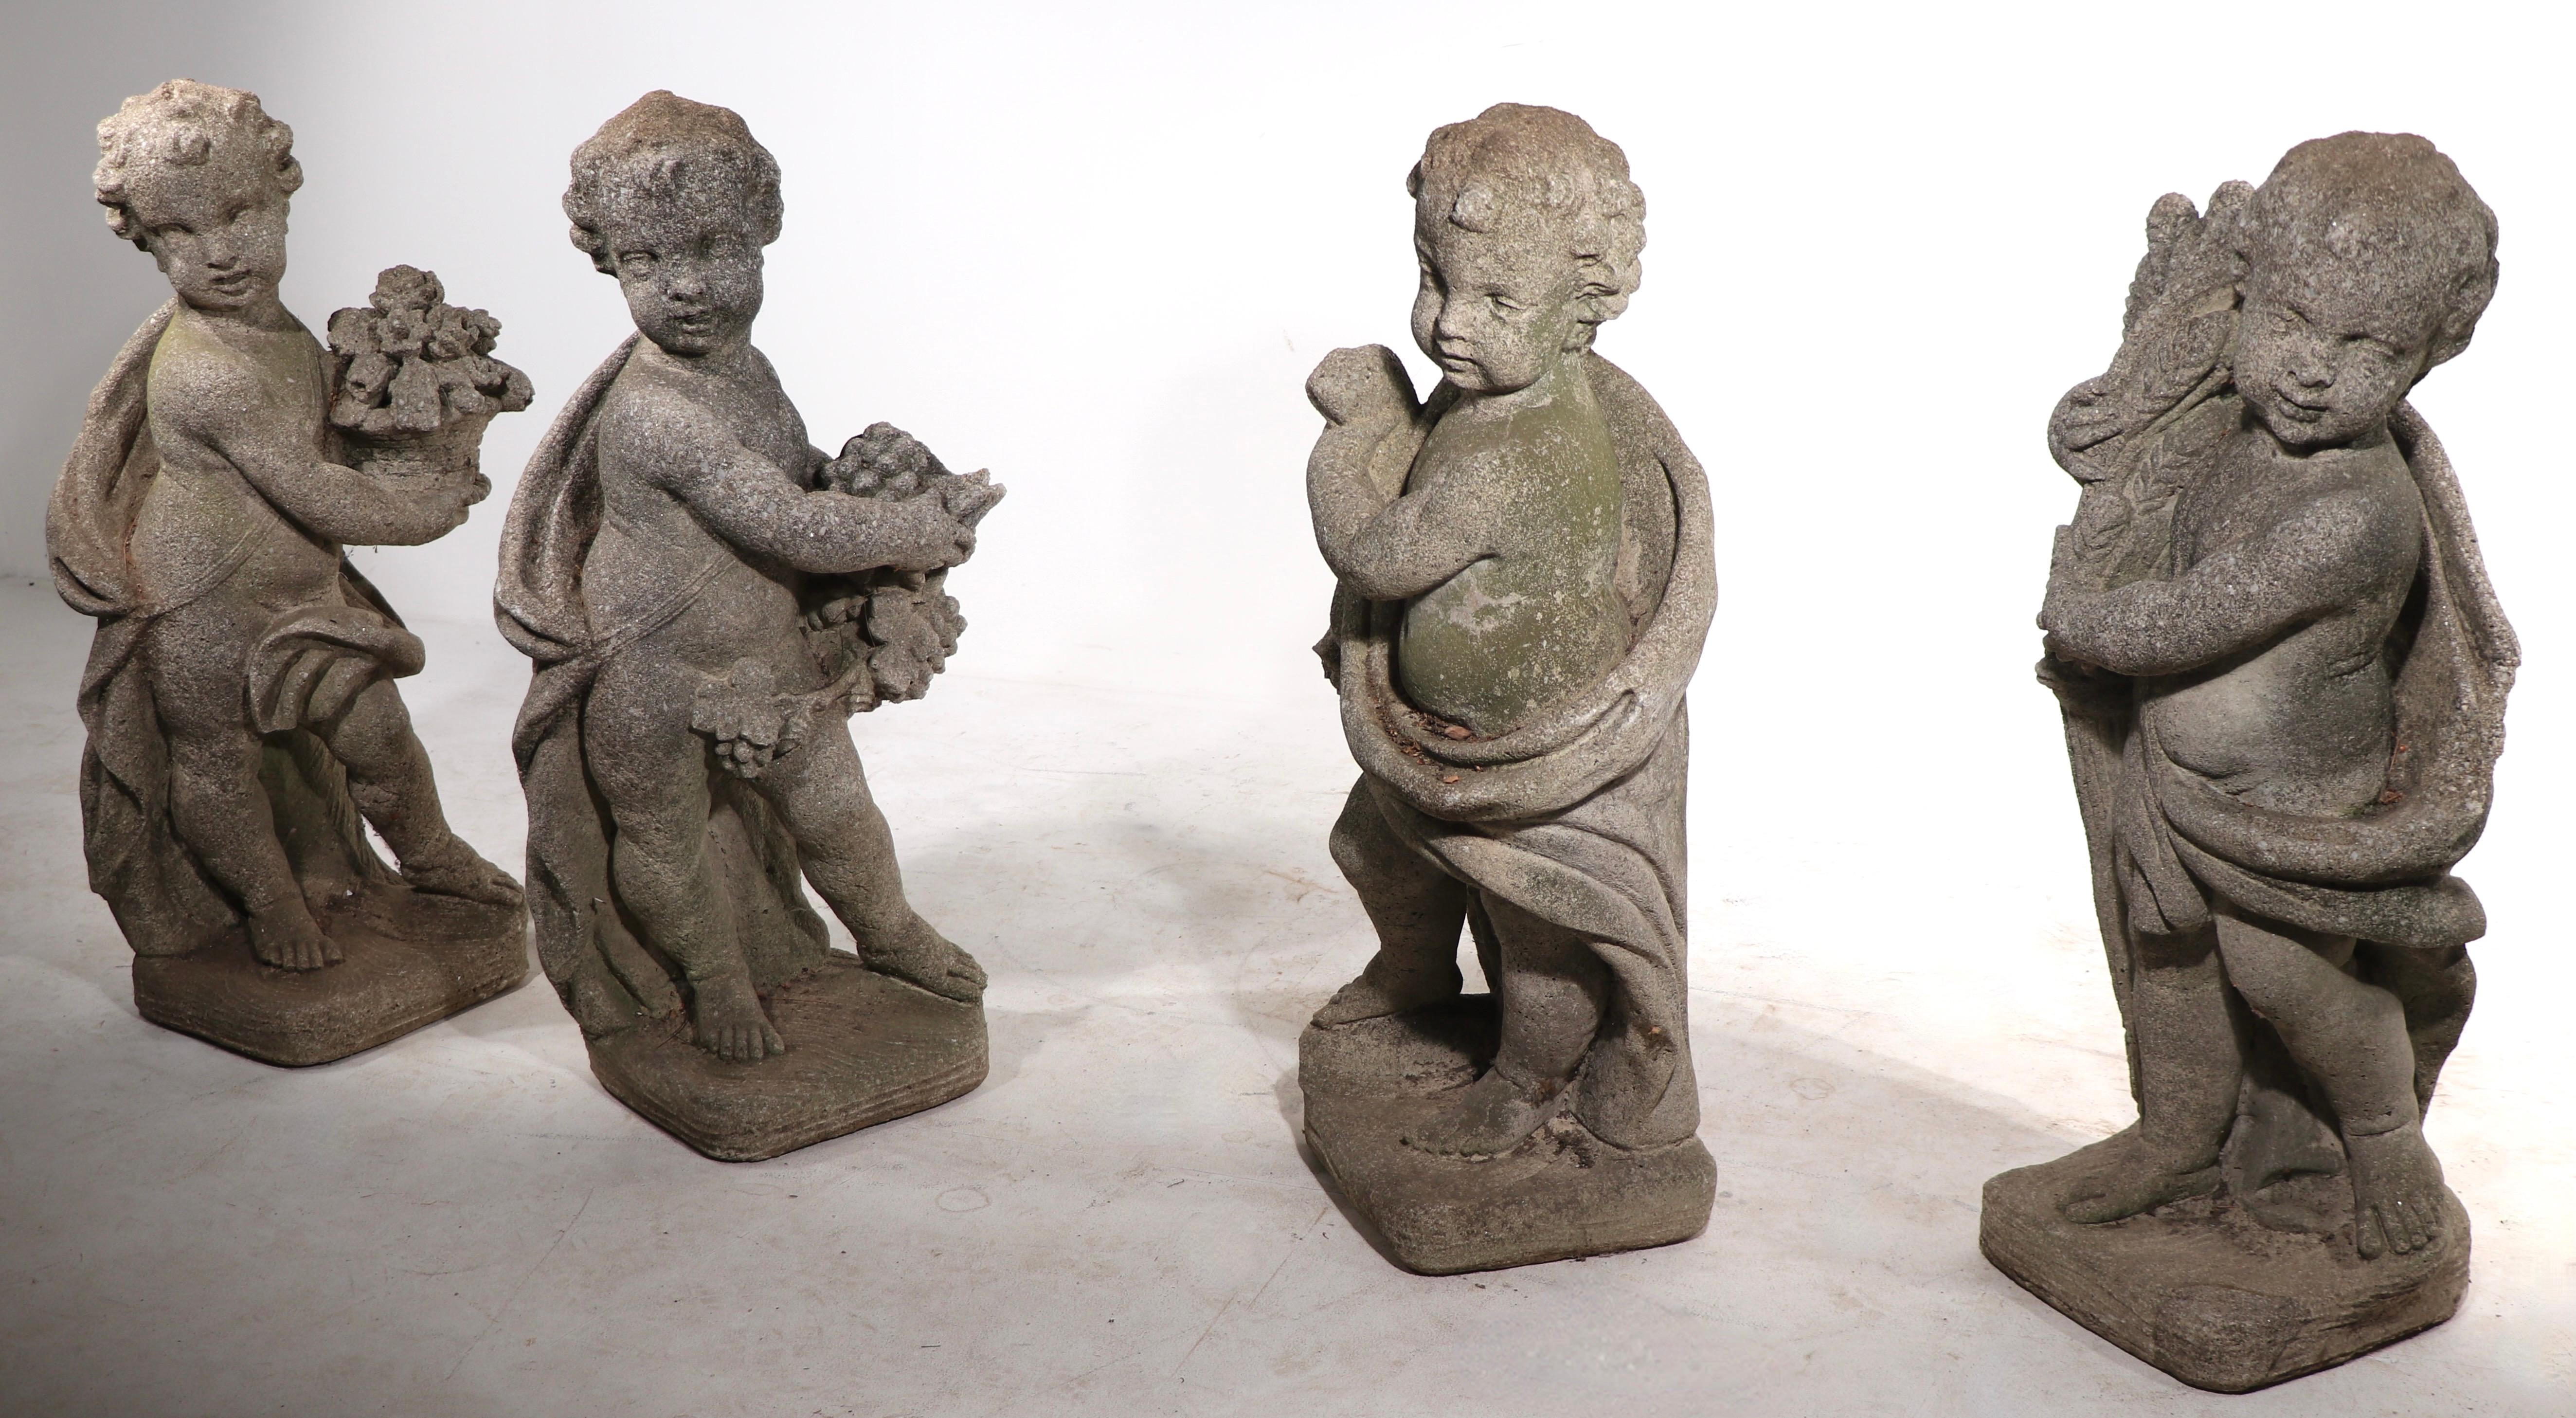 Second payment for Four Seasons Cast Stone Garden Statues 8